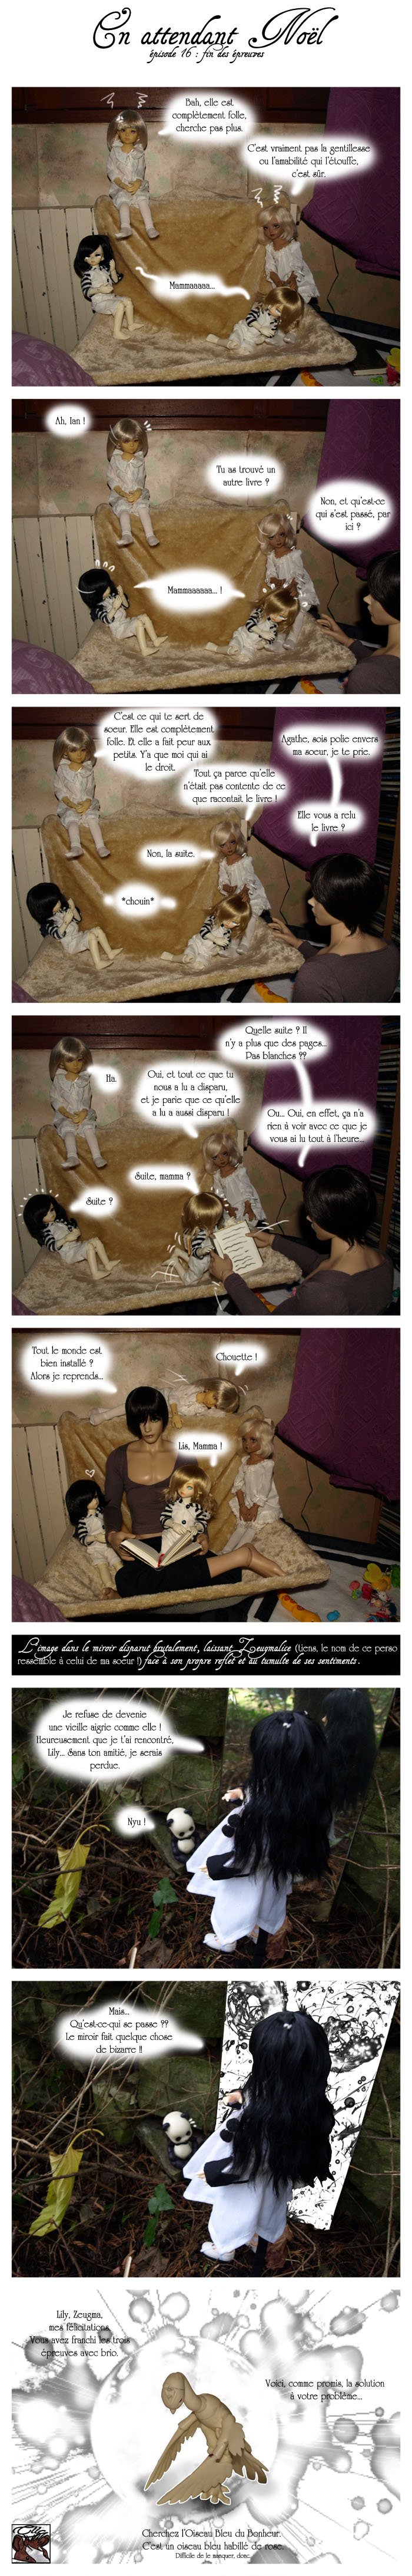 [Heika's 3] A suivre p 72 - Page 4 End_of__test_by_monsieur_cheval-d8a3bki